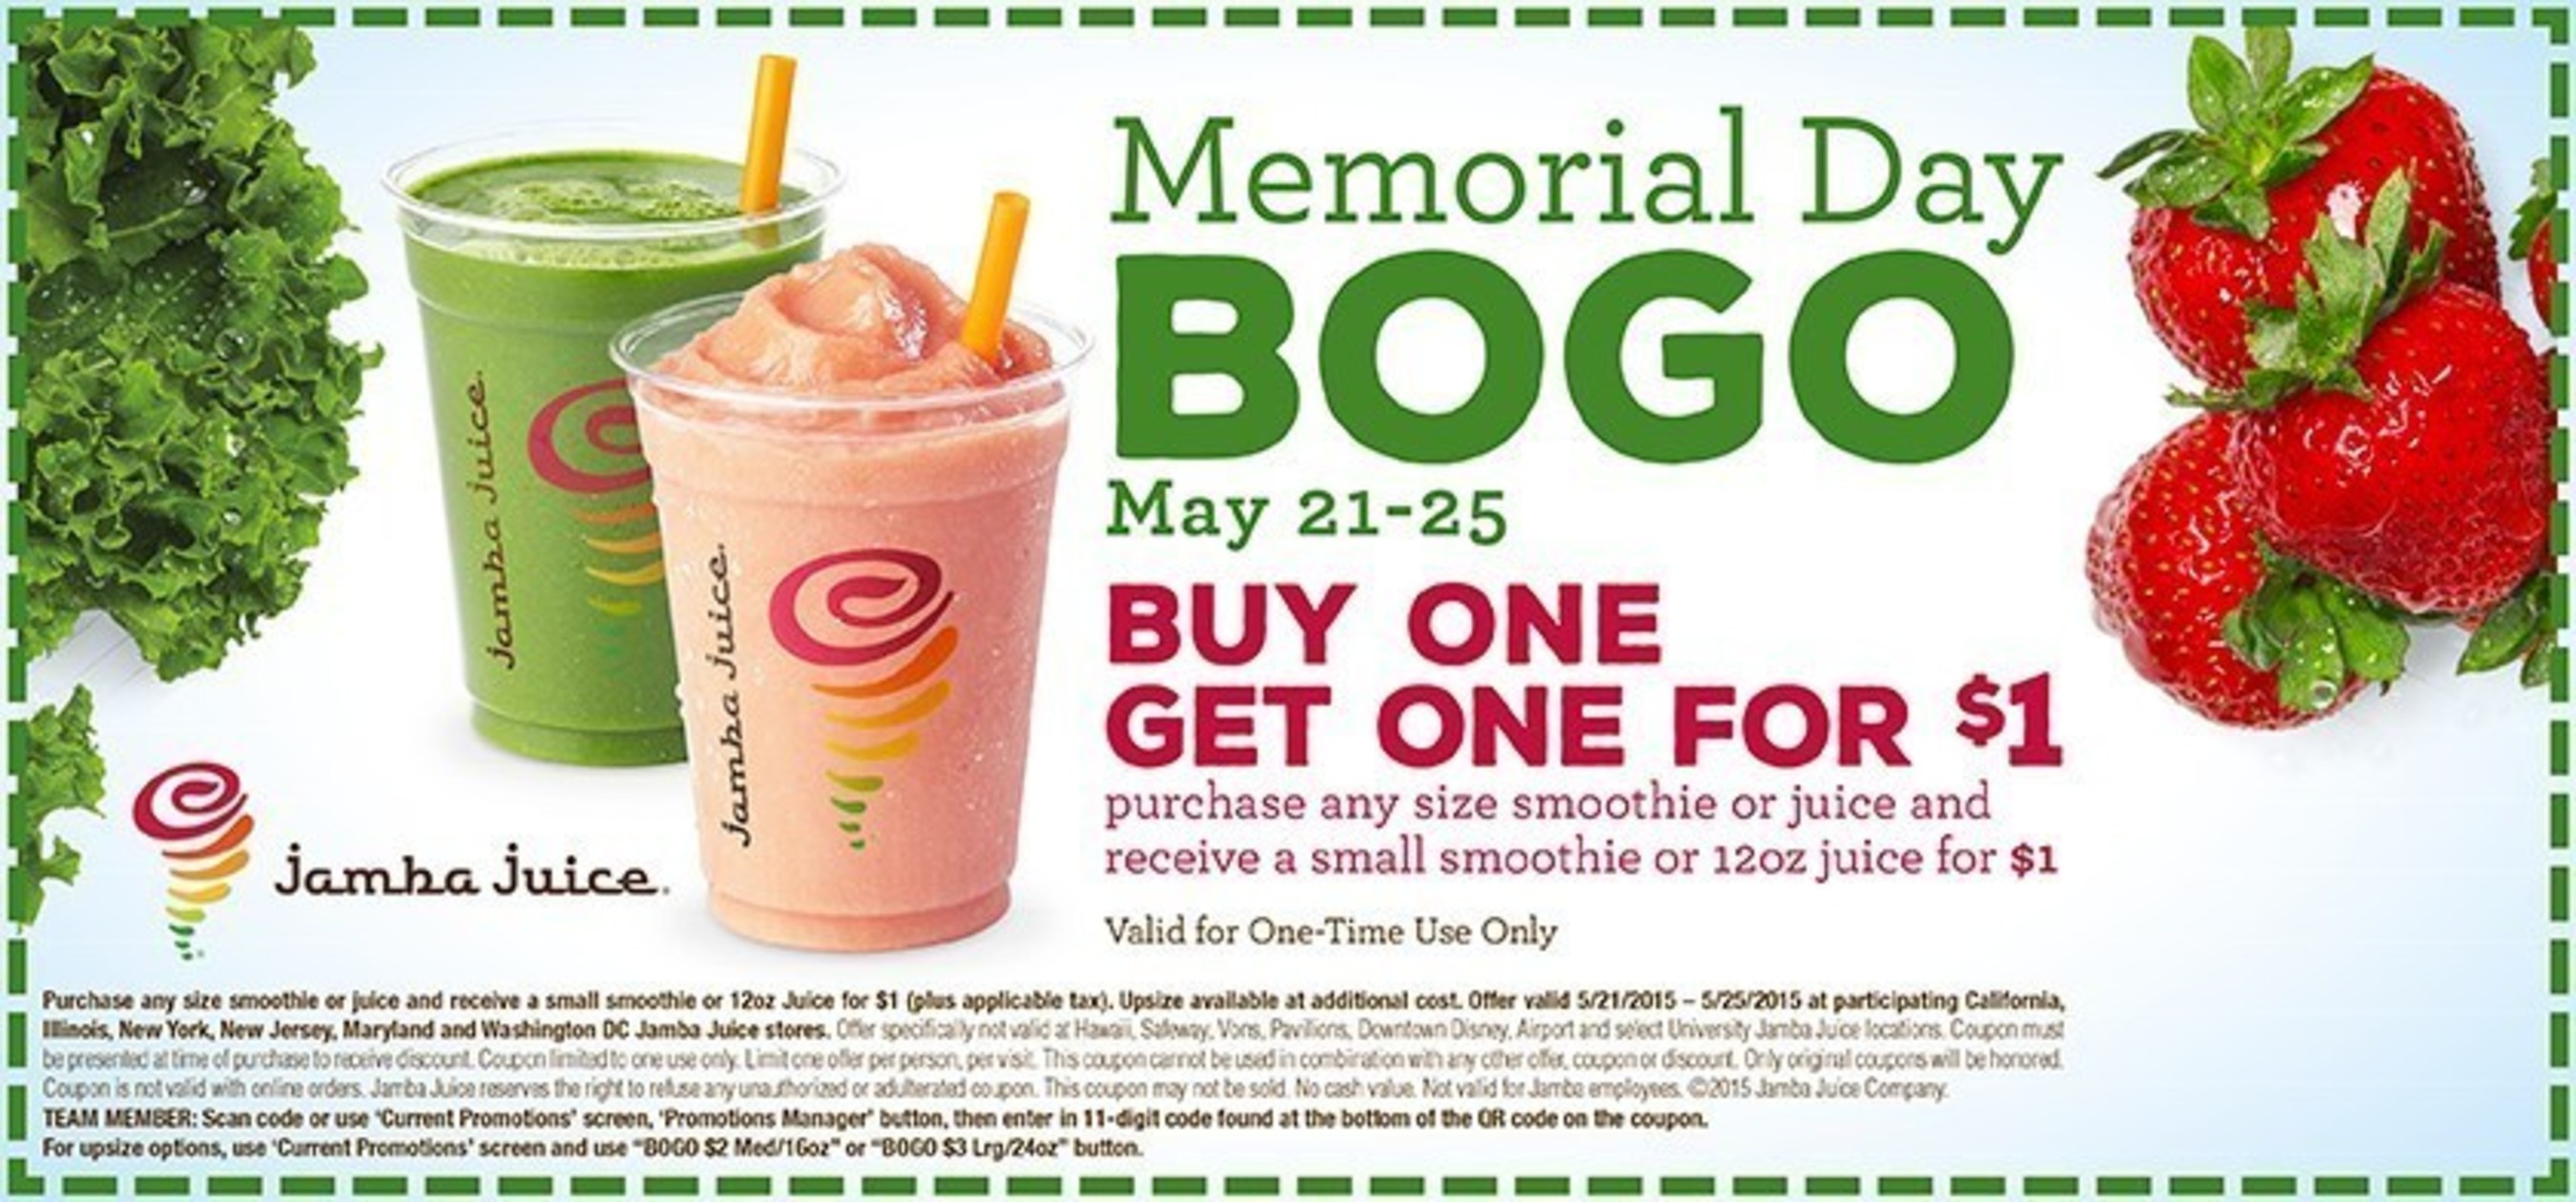 Jamba Juice Offers Memorial Day Weekend Bogo 1 Deal From May 21